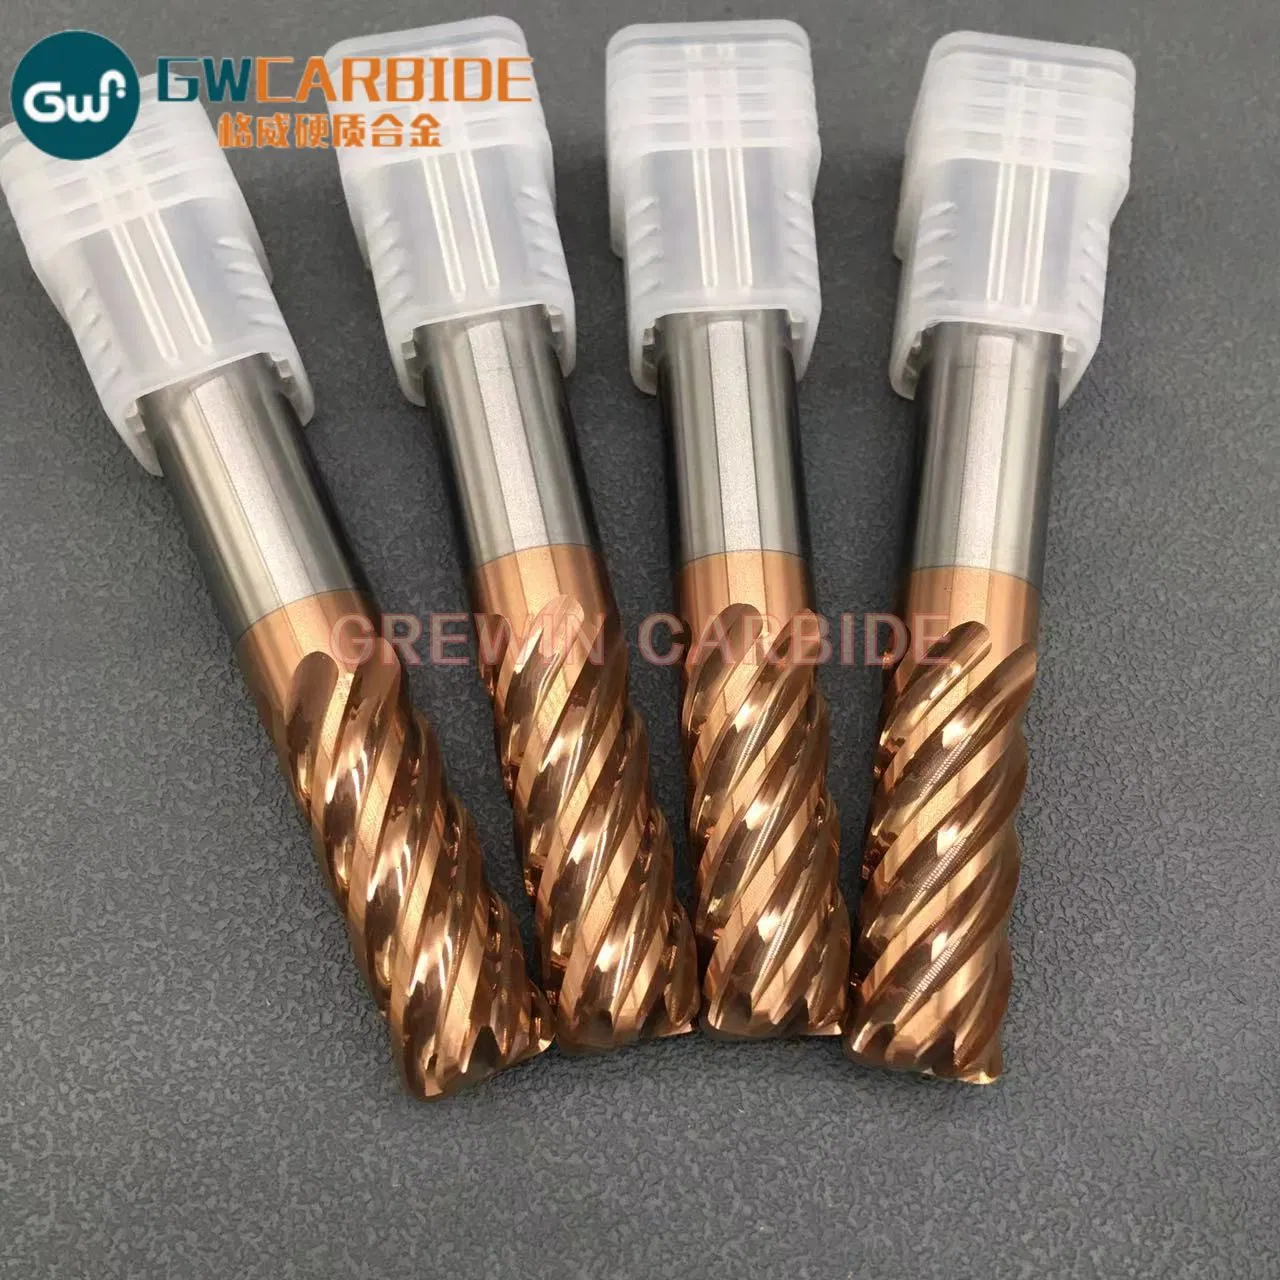 Gw Carbide-Solid Tungsten Carbide Cutting Tools in Stock 6 Flute Corner Radius End Mill for Steel